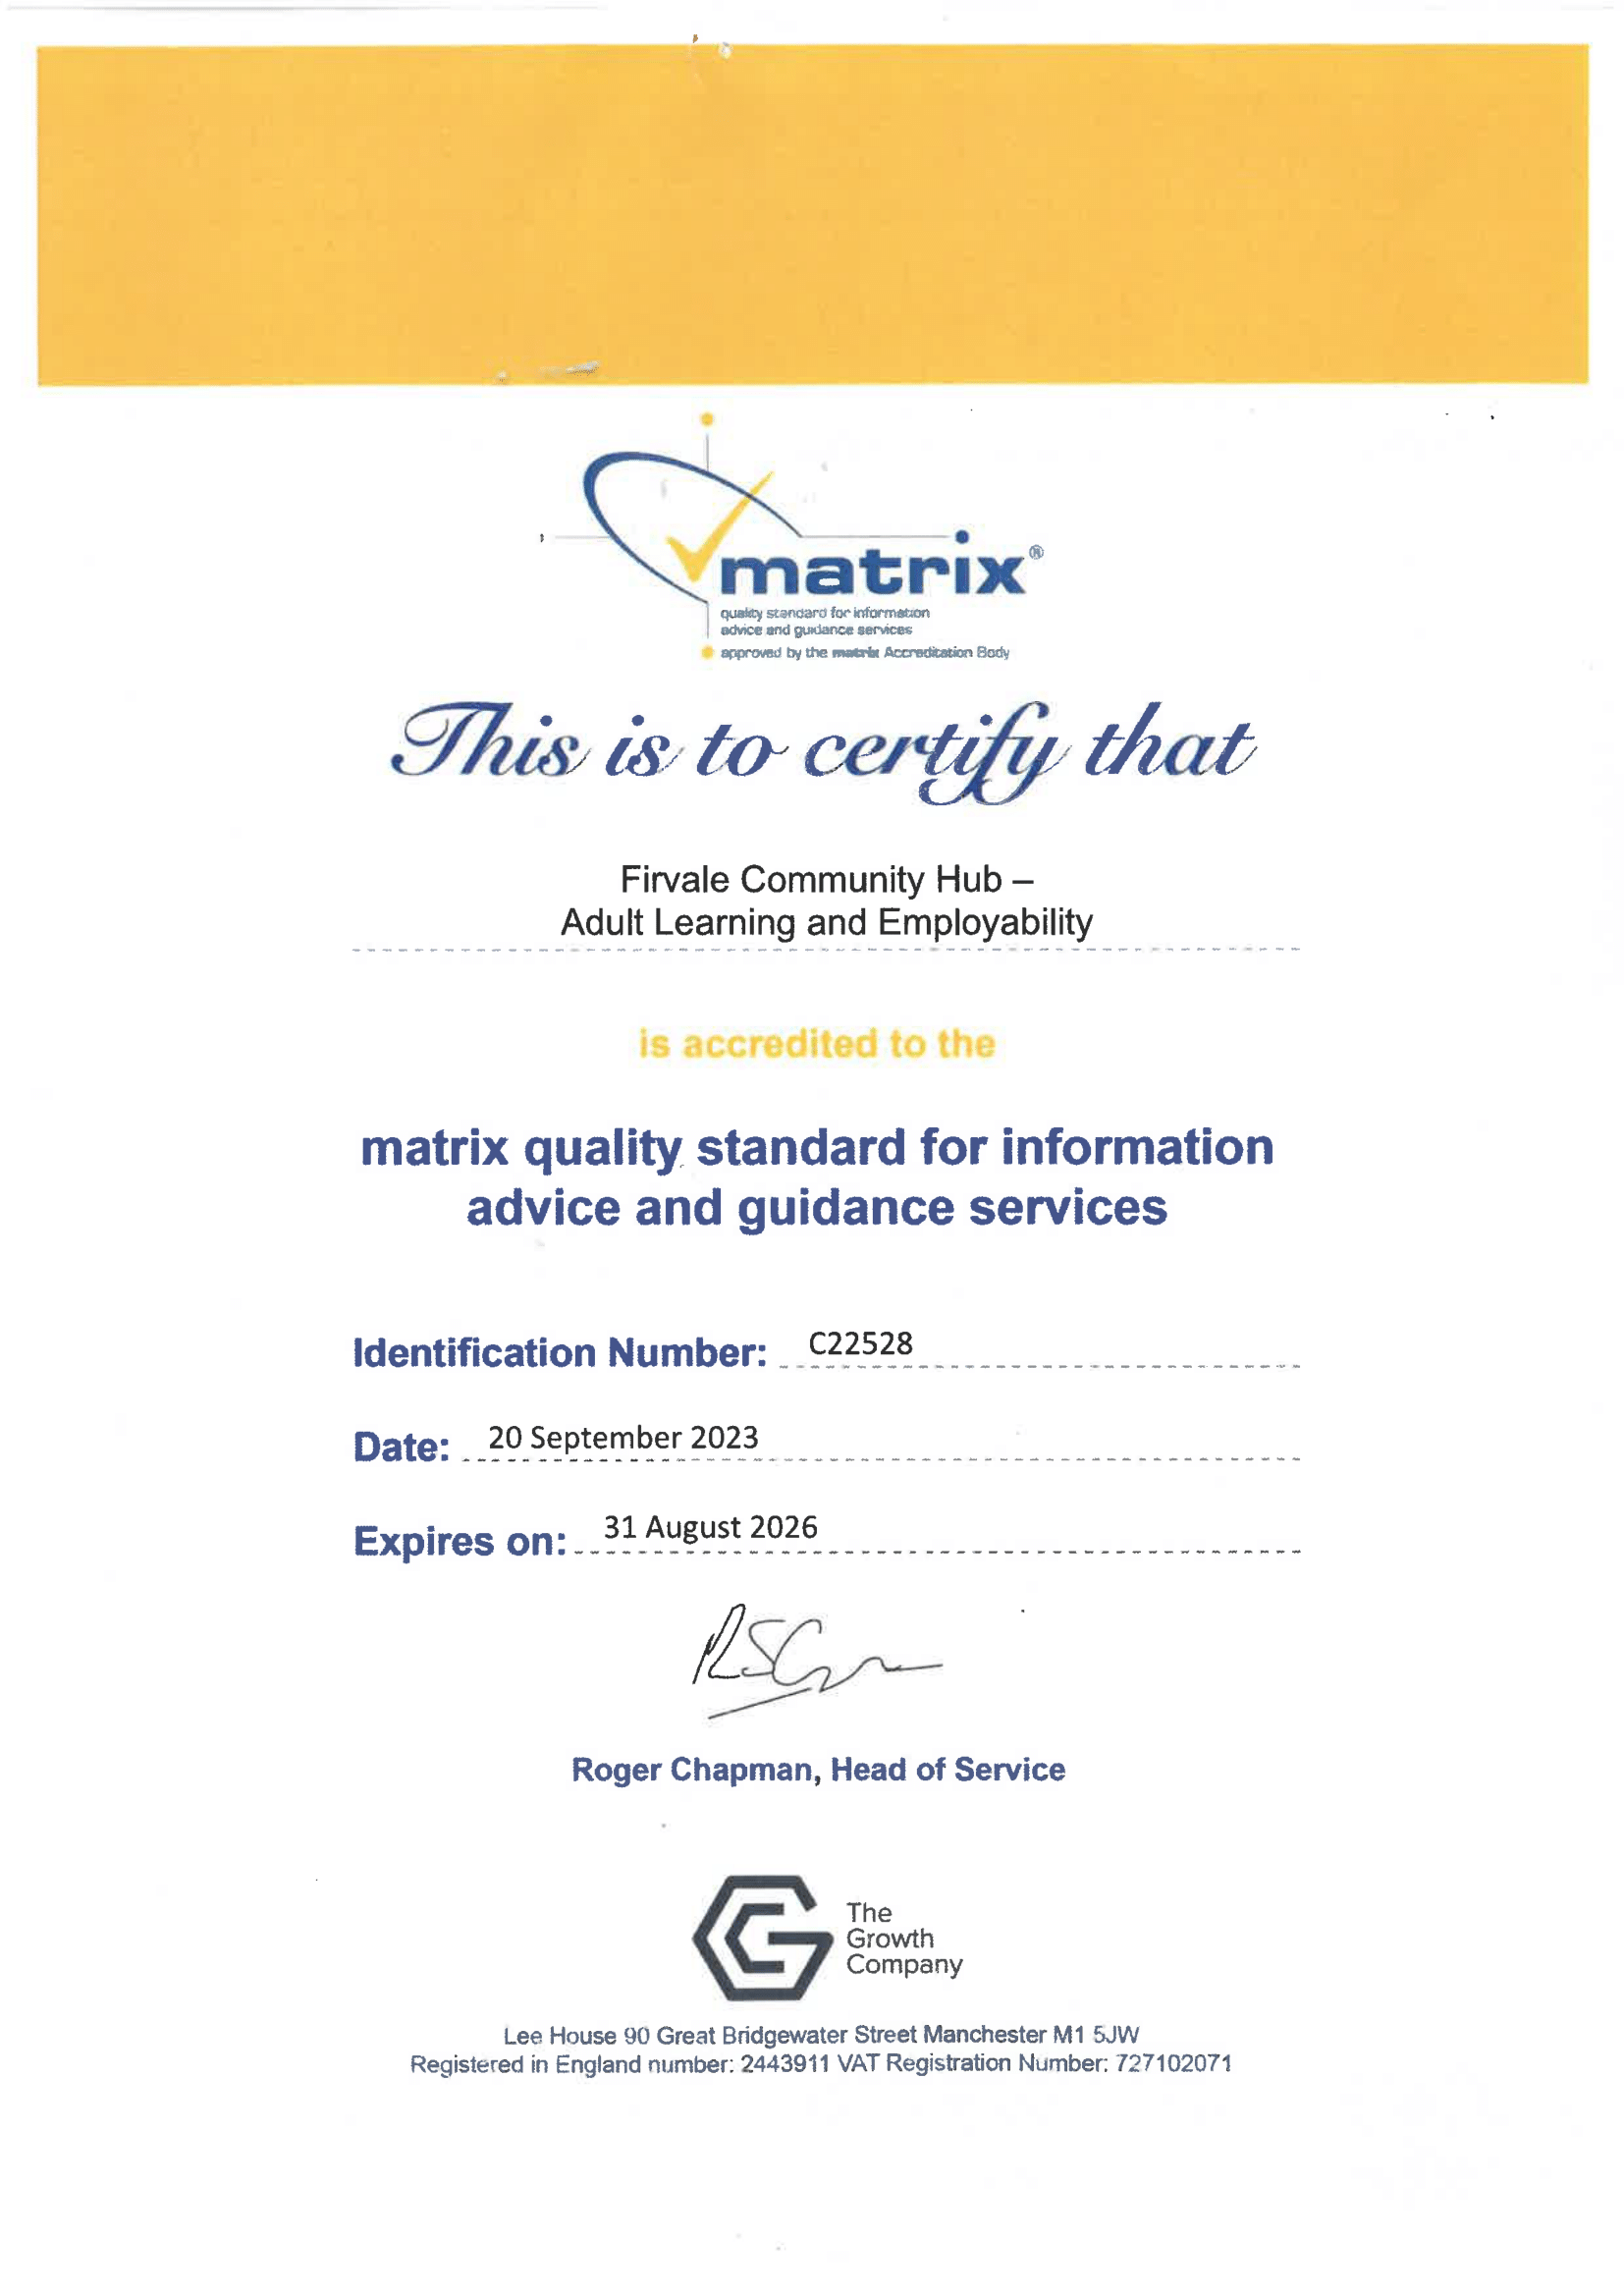 Matrix Quality Standard for Information Advice and Services